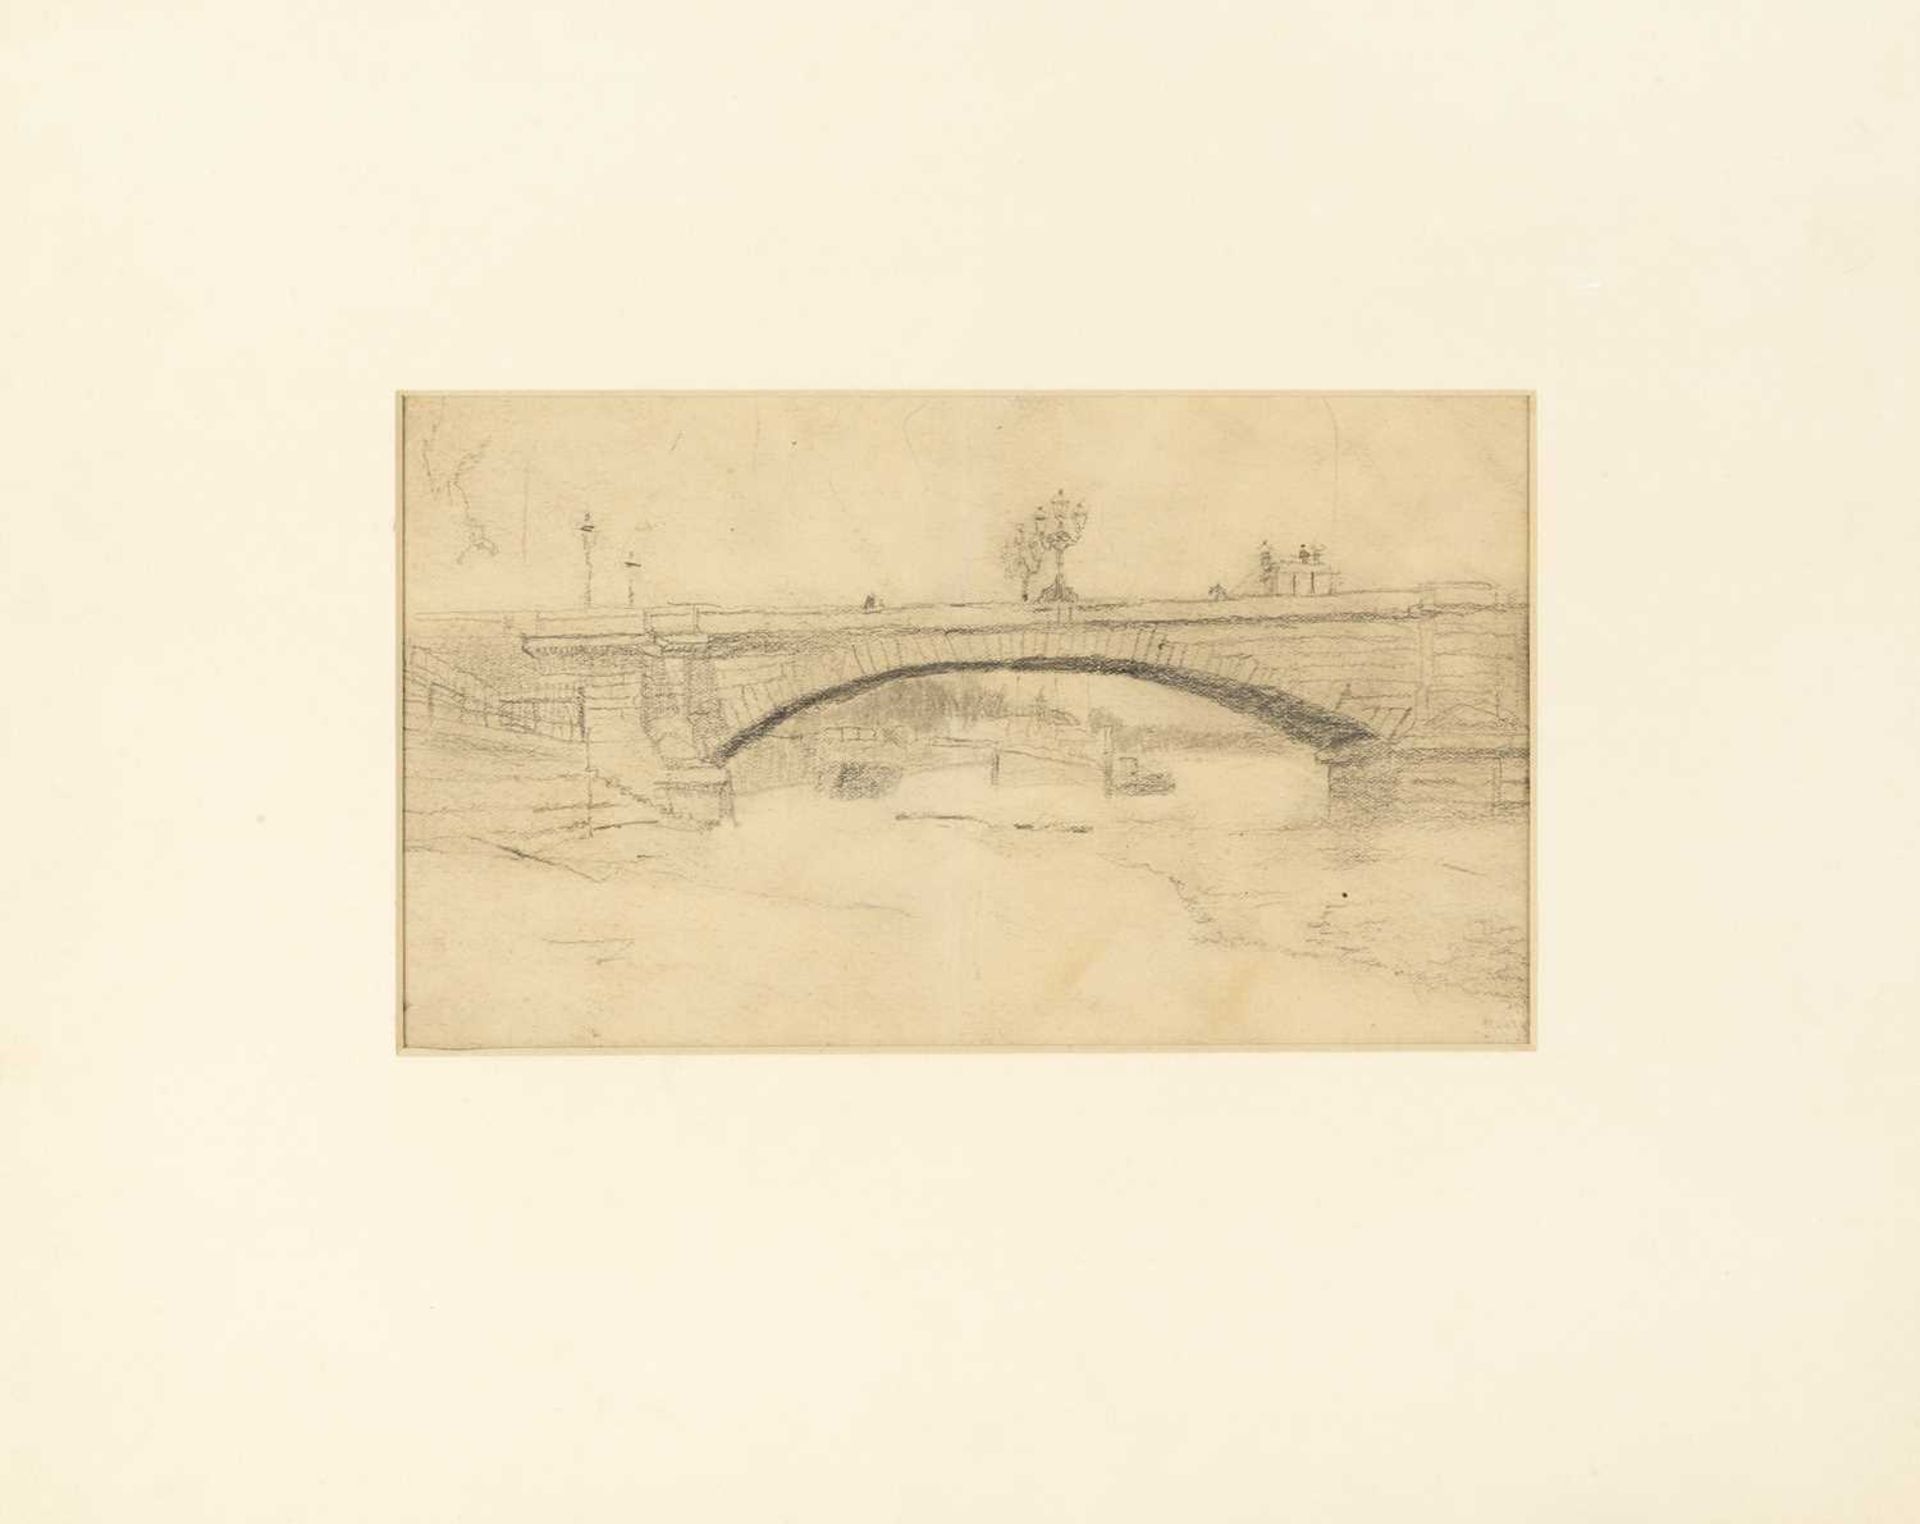 Walter Greaves (1846-1930) Battersea New Bridge inscribed (to reverse) pencil on paper 13 x 22cm. - Image 2 of 3